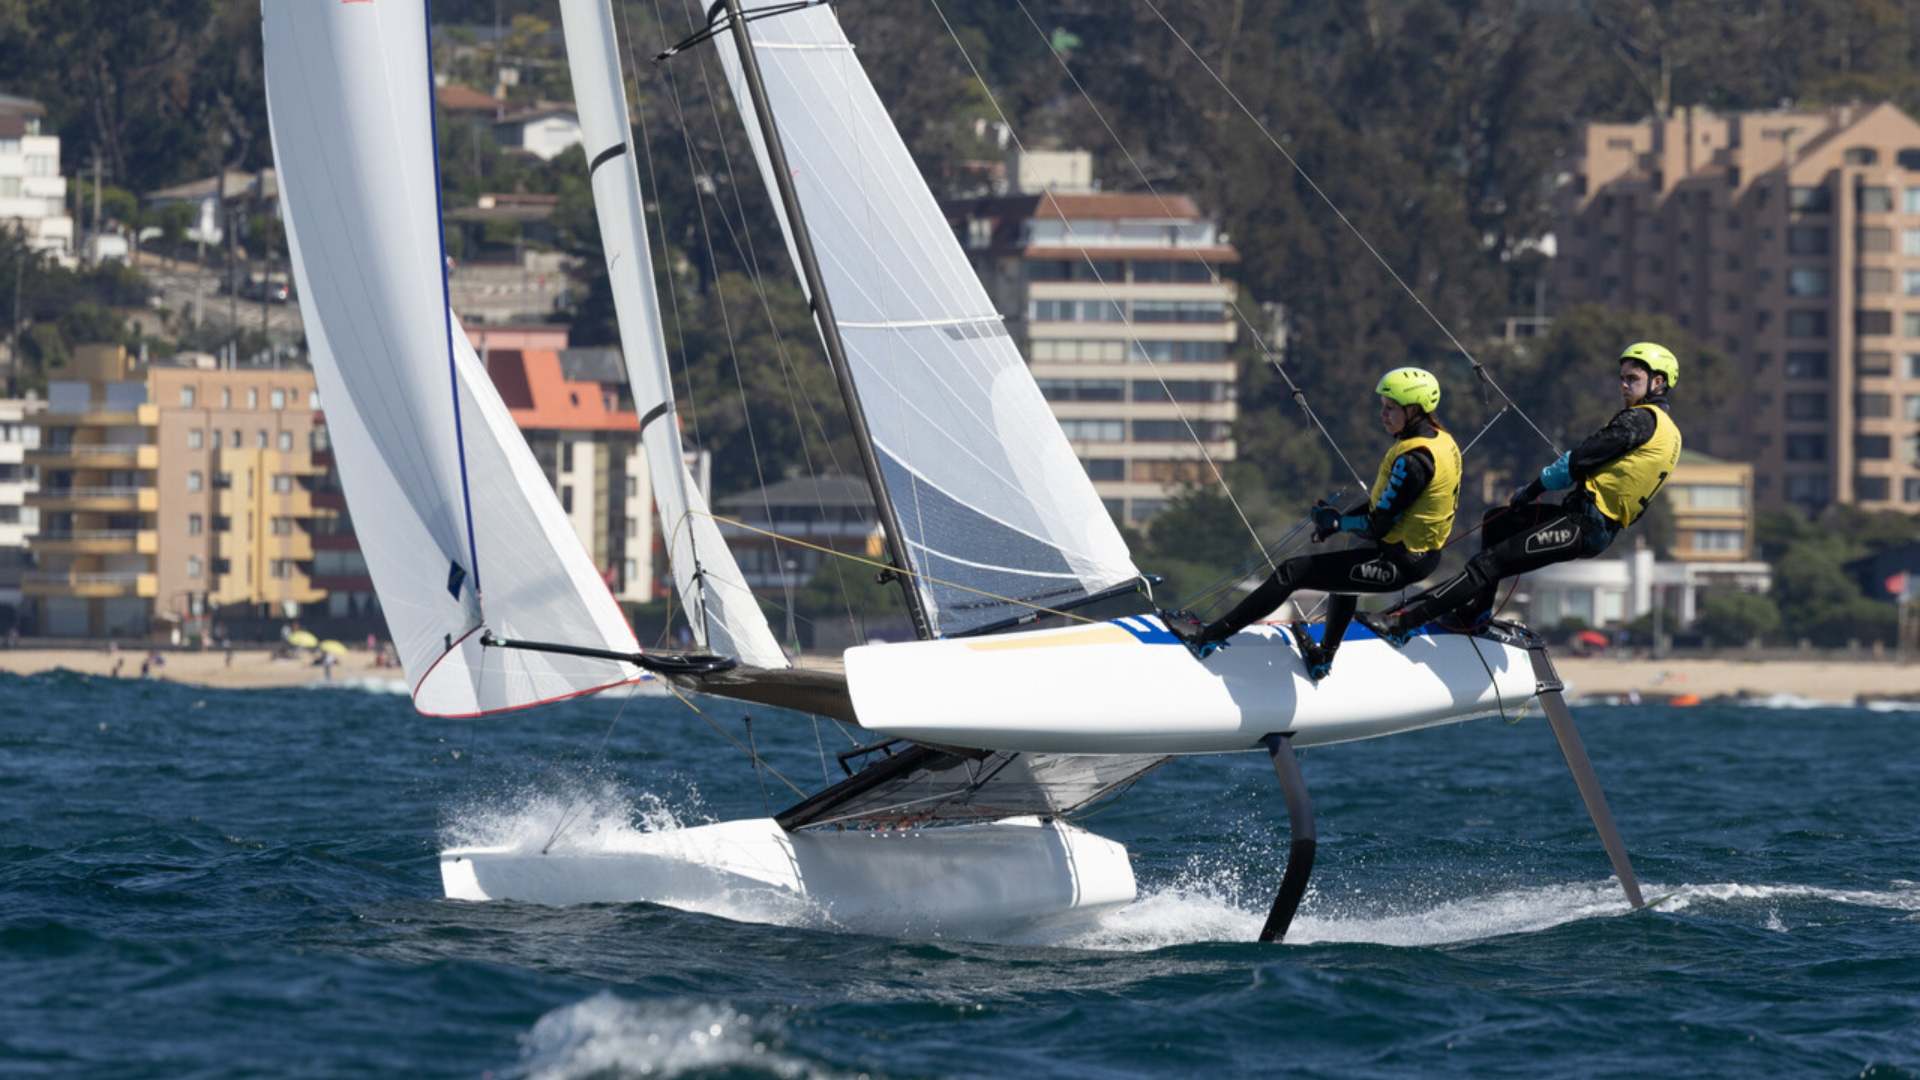 Sailing: Brazilian Olympic champions aim for gold that takes them to Paris